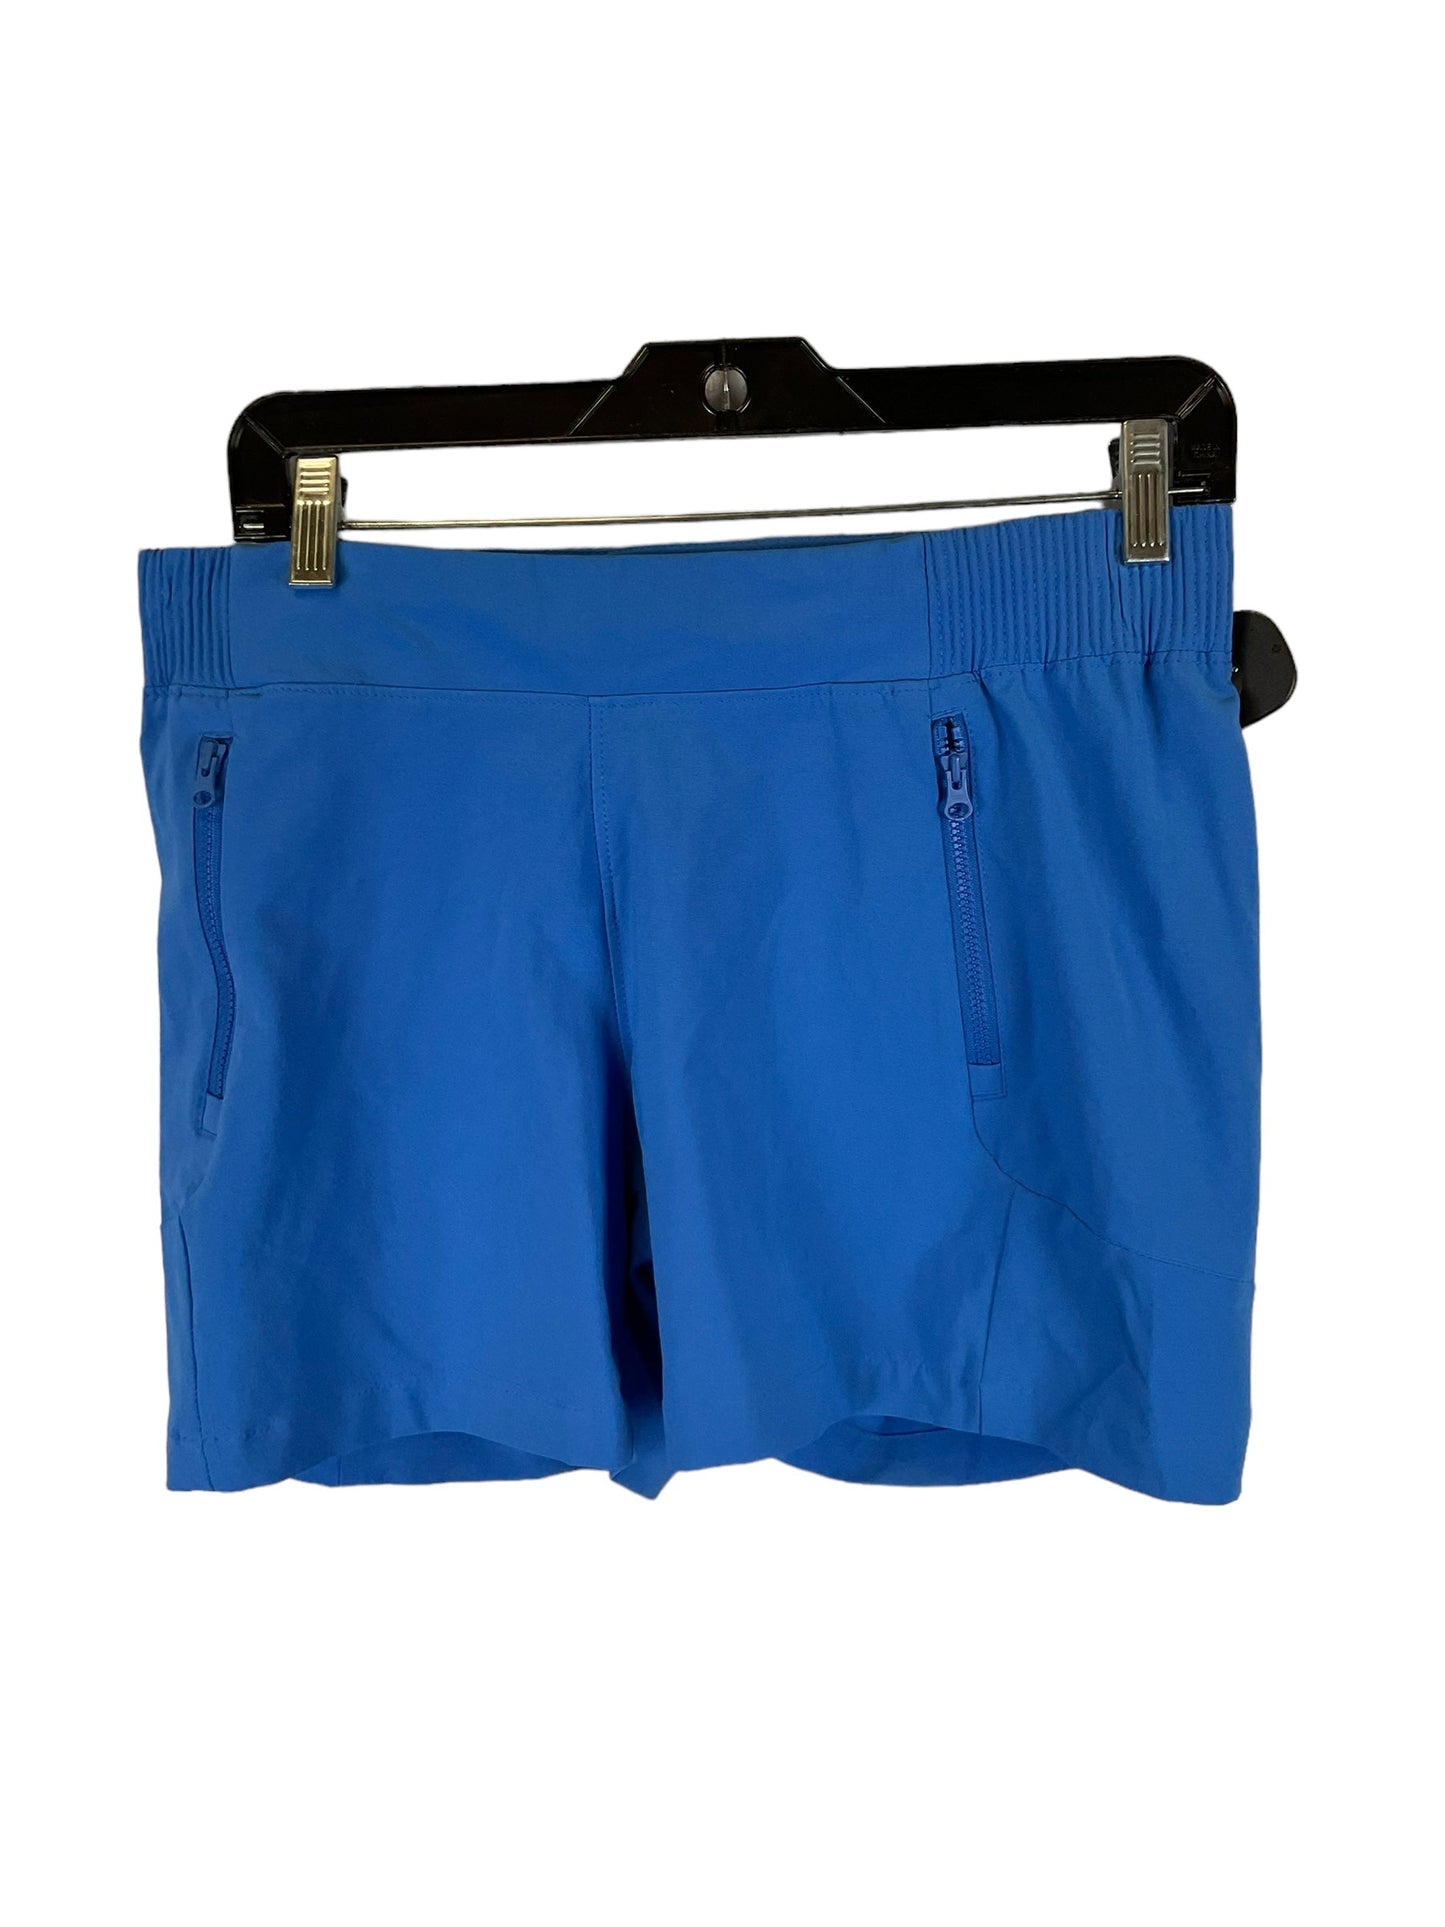 Blue Shorts Columbia, Size S